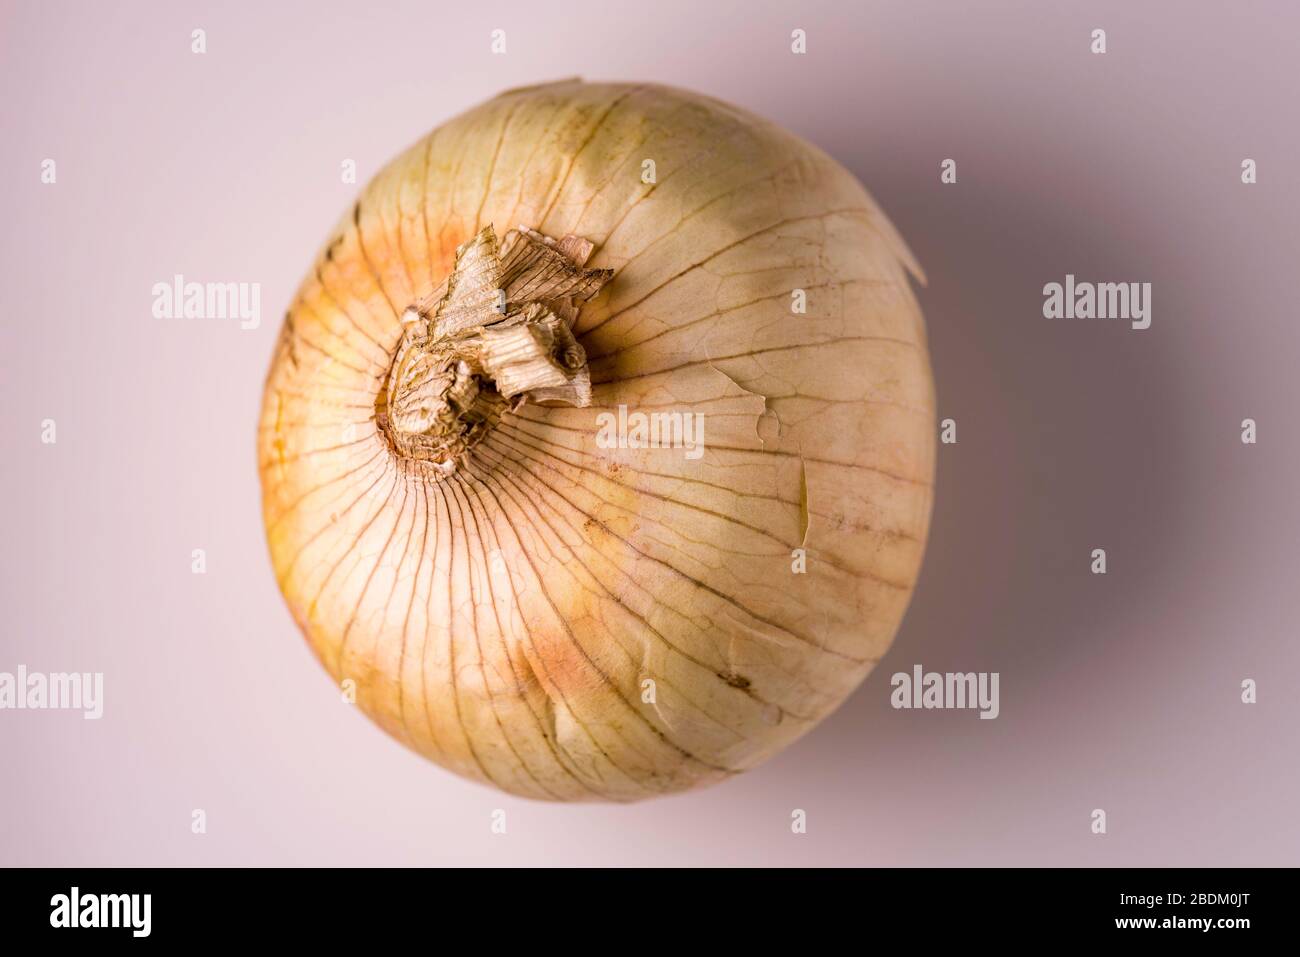 Raw onion from above Stock Photo